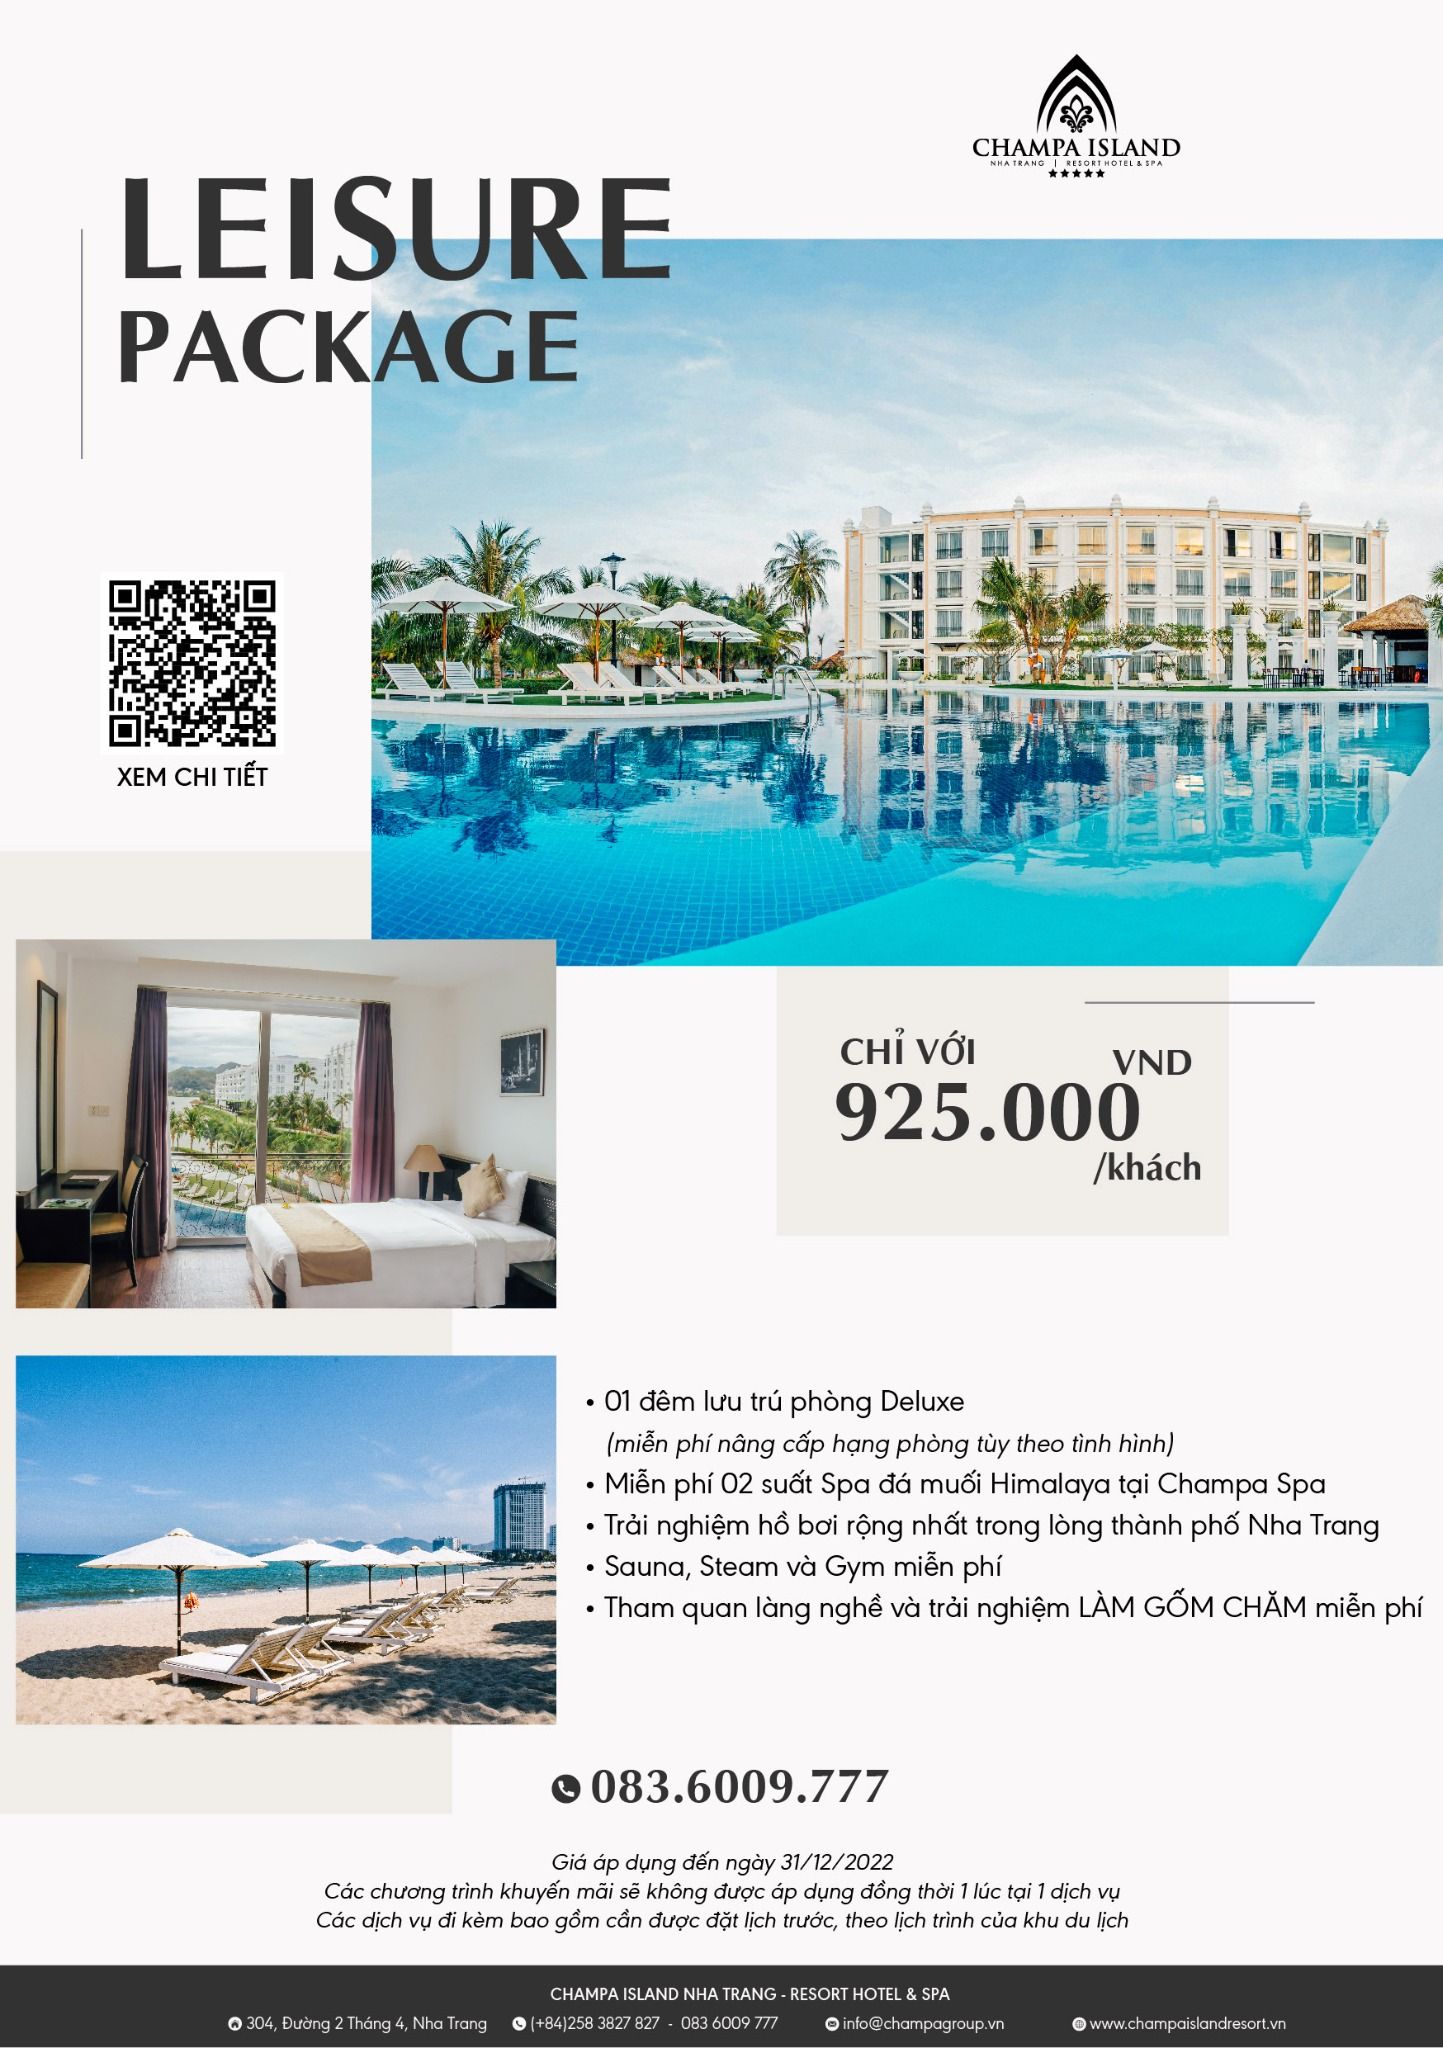 LEISURE PACKAGE - 925.000 VND/KHÁCH